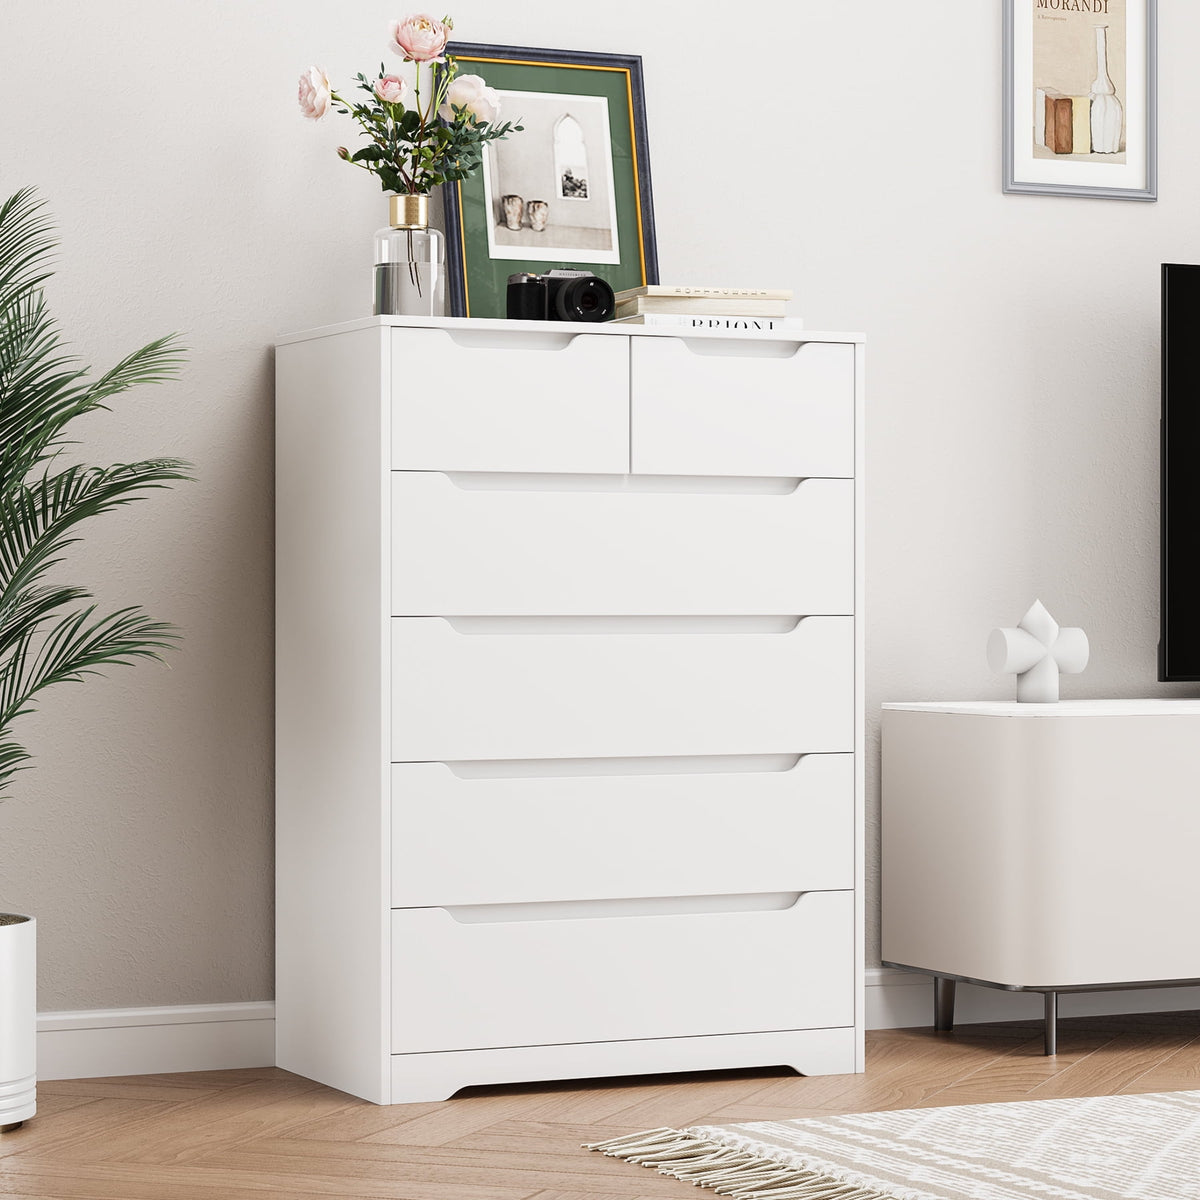 Homfa 6 Drawer White Dresser, Tall Storage Cabinet Chest of Drawers fo ...